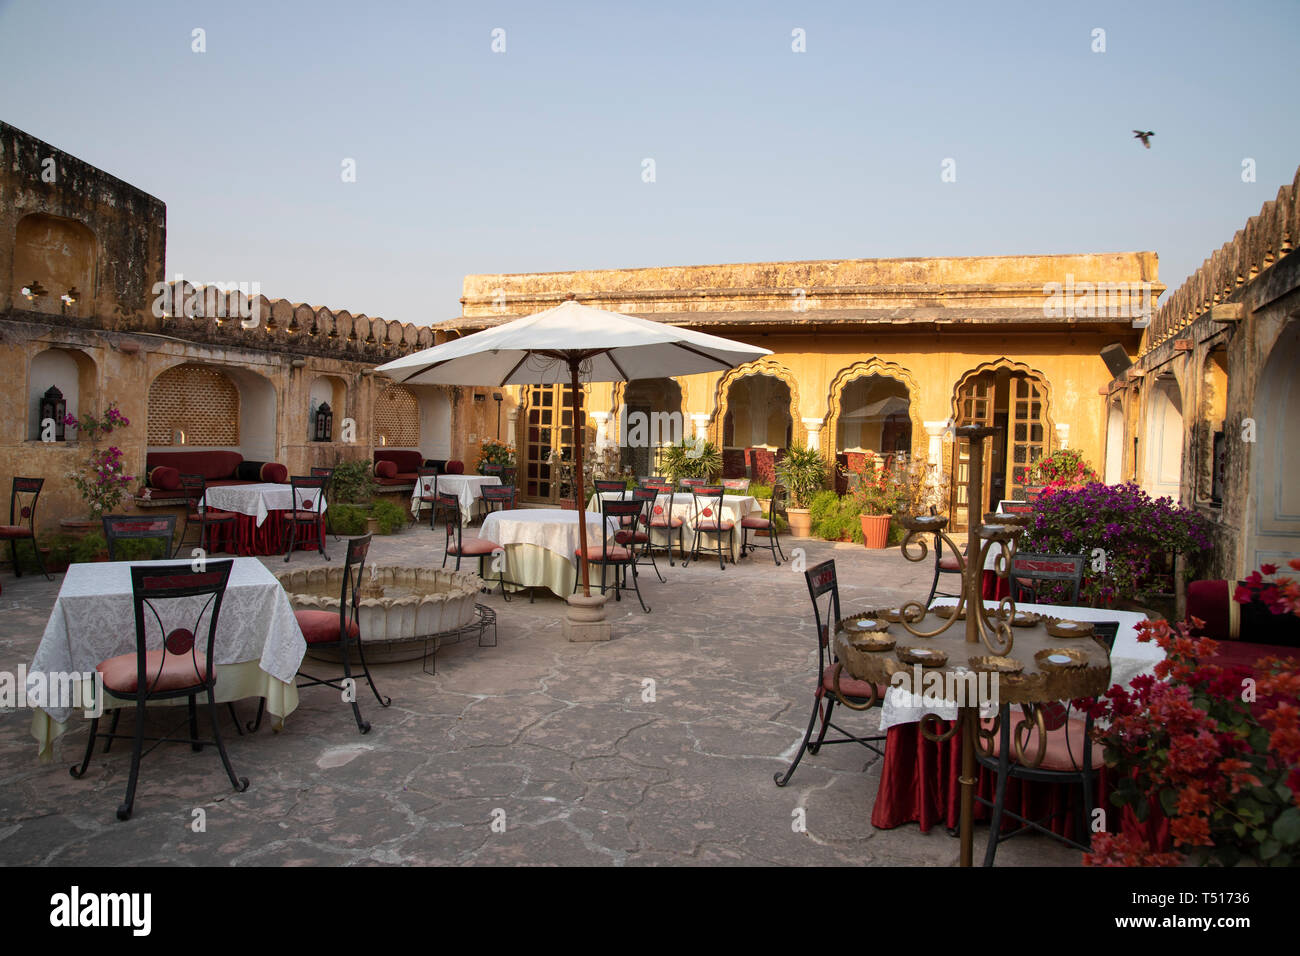 India, Rajasthan, Jaipur, Amber, Amber Fort and Wall Fortifications, Restaurant inside the fort Stock Photo